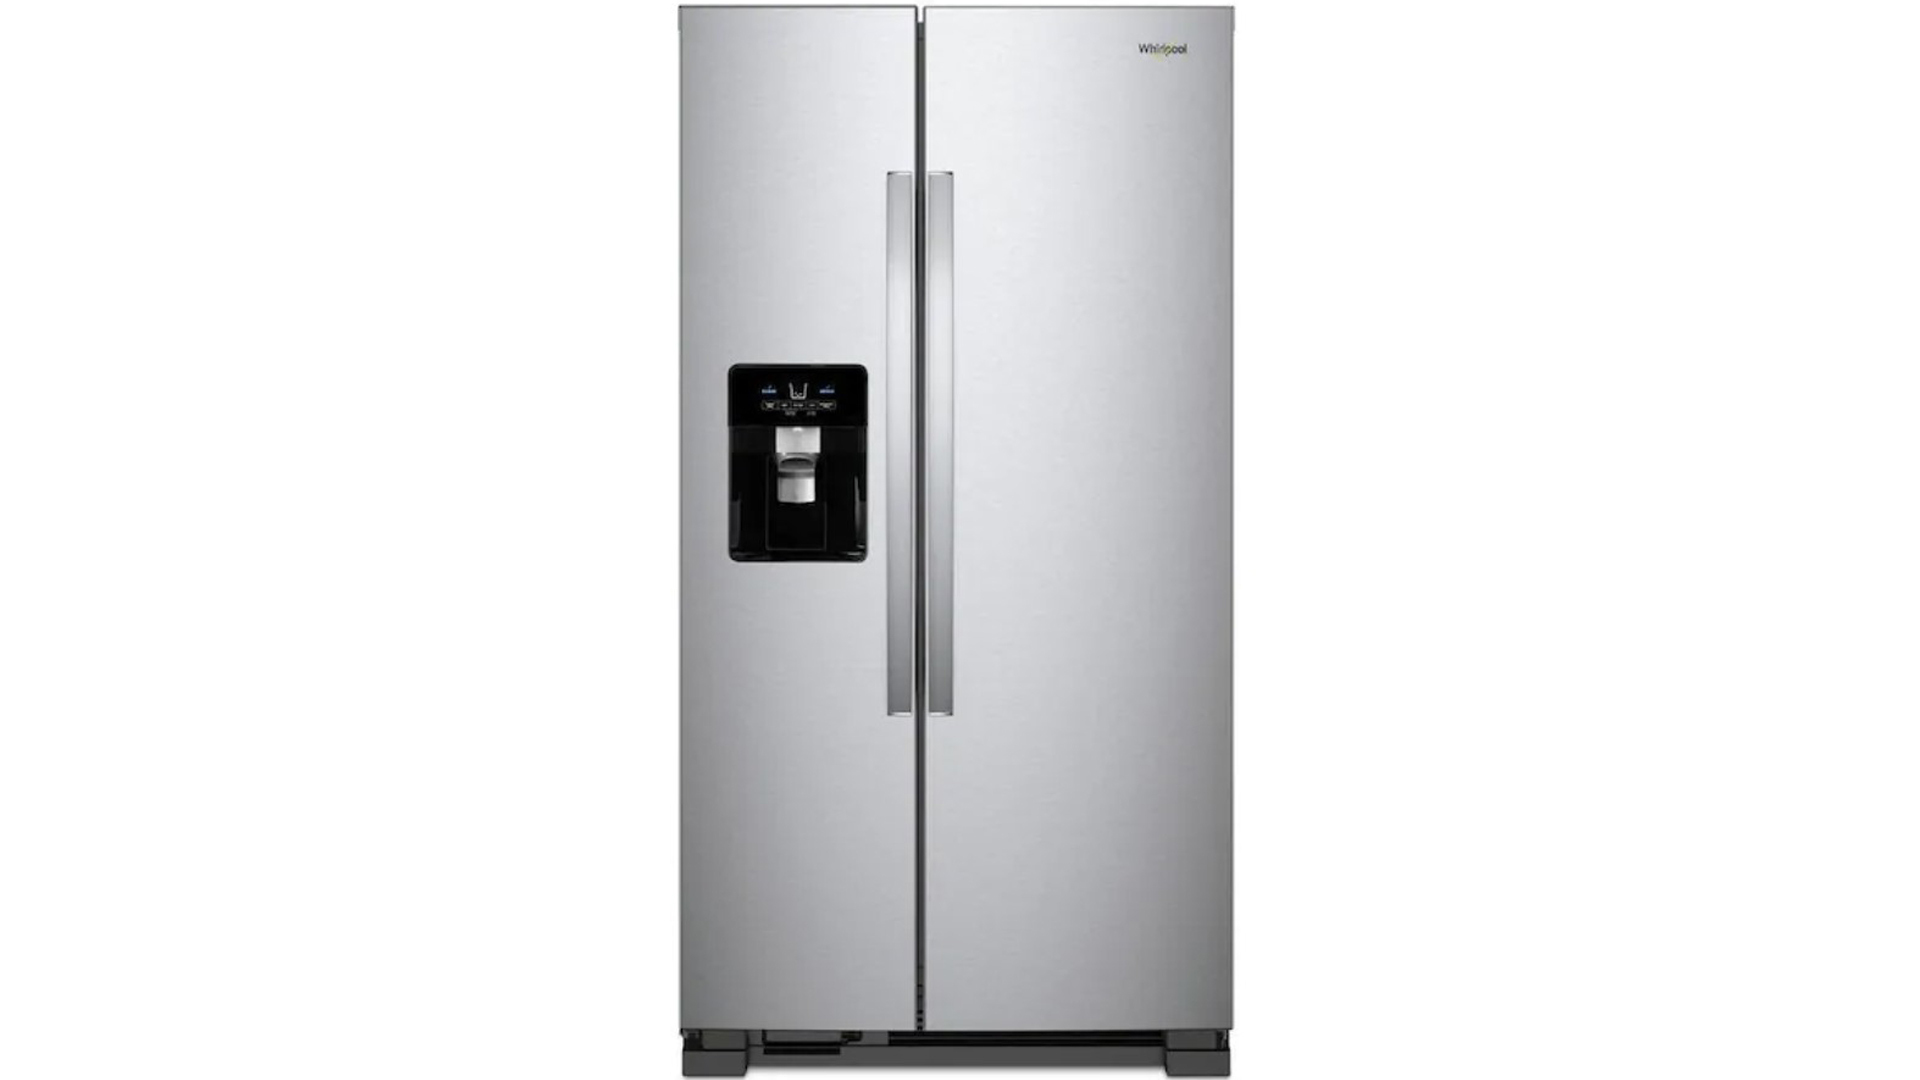 Whirlpool 24.6 cu. ft. Side by Side Refrigerator in Fingerprint Resistant  Stainless Steel WRS325SDHZ - The Home Depot